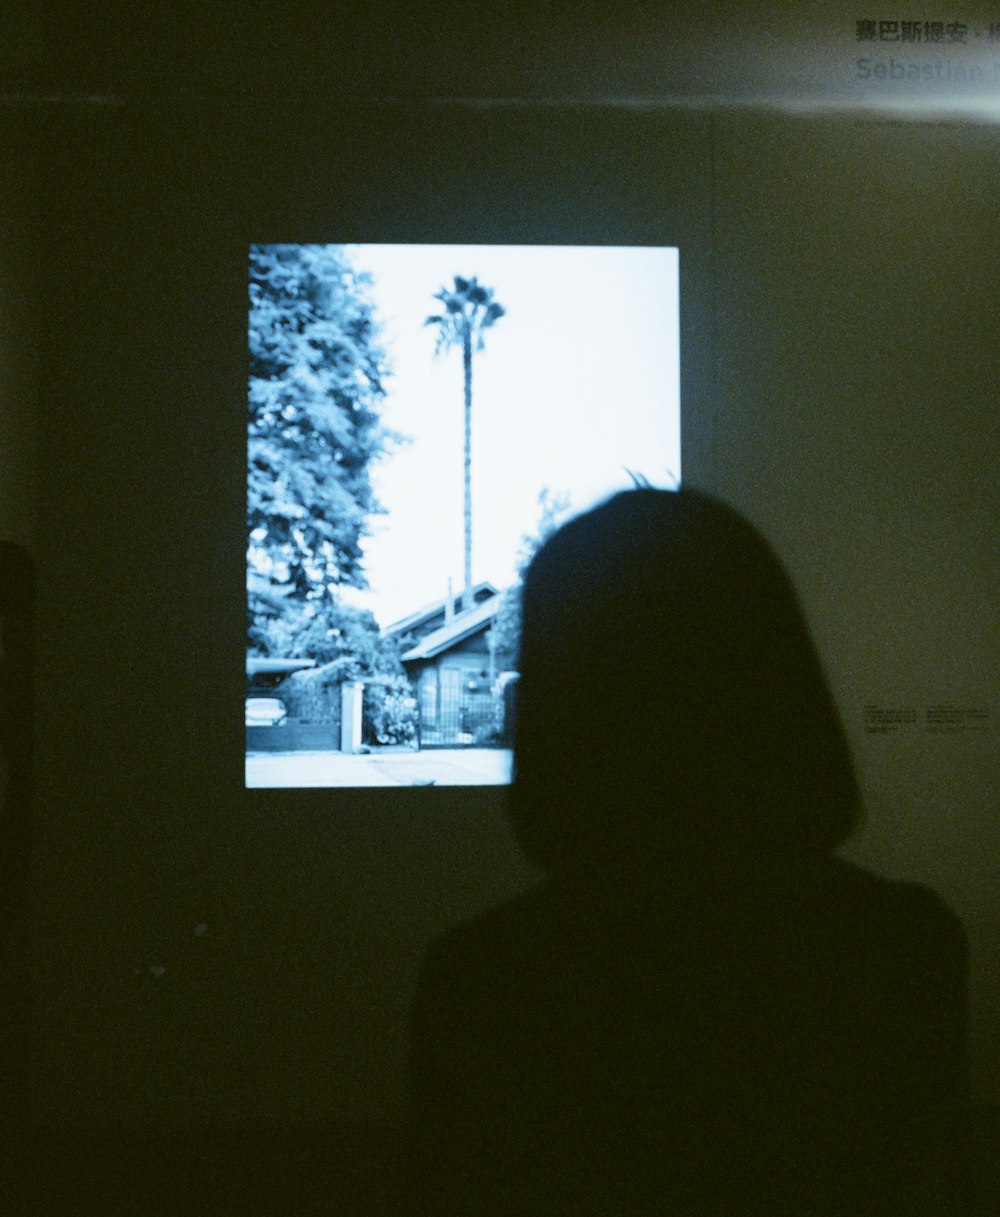 a person standing in front of a television in a dark room